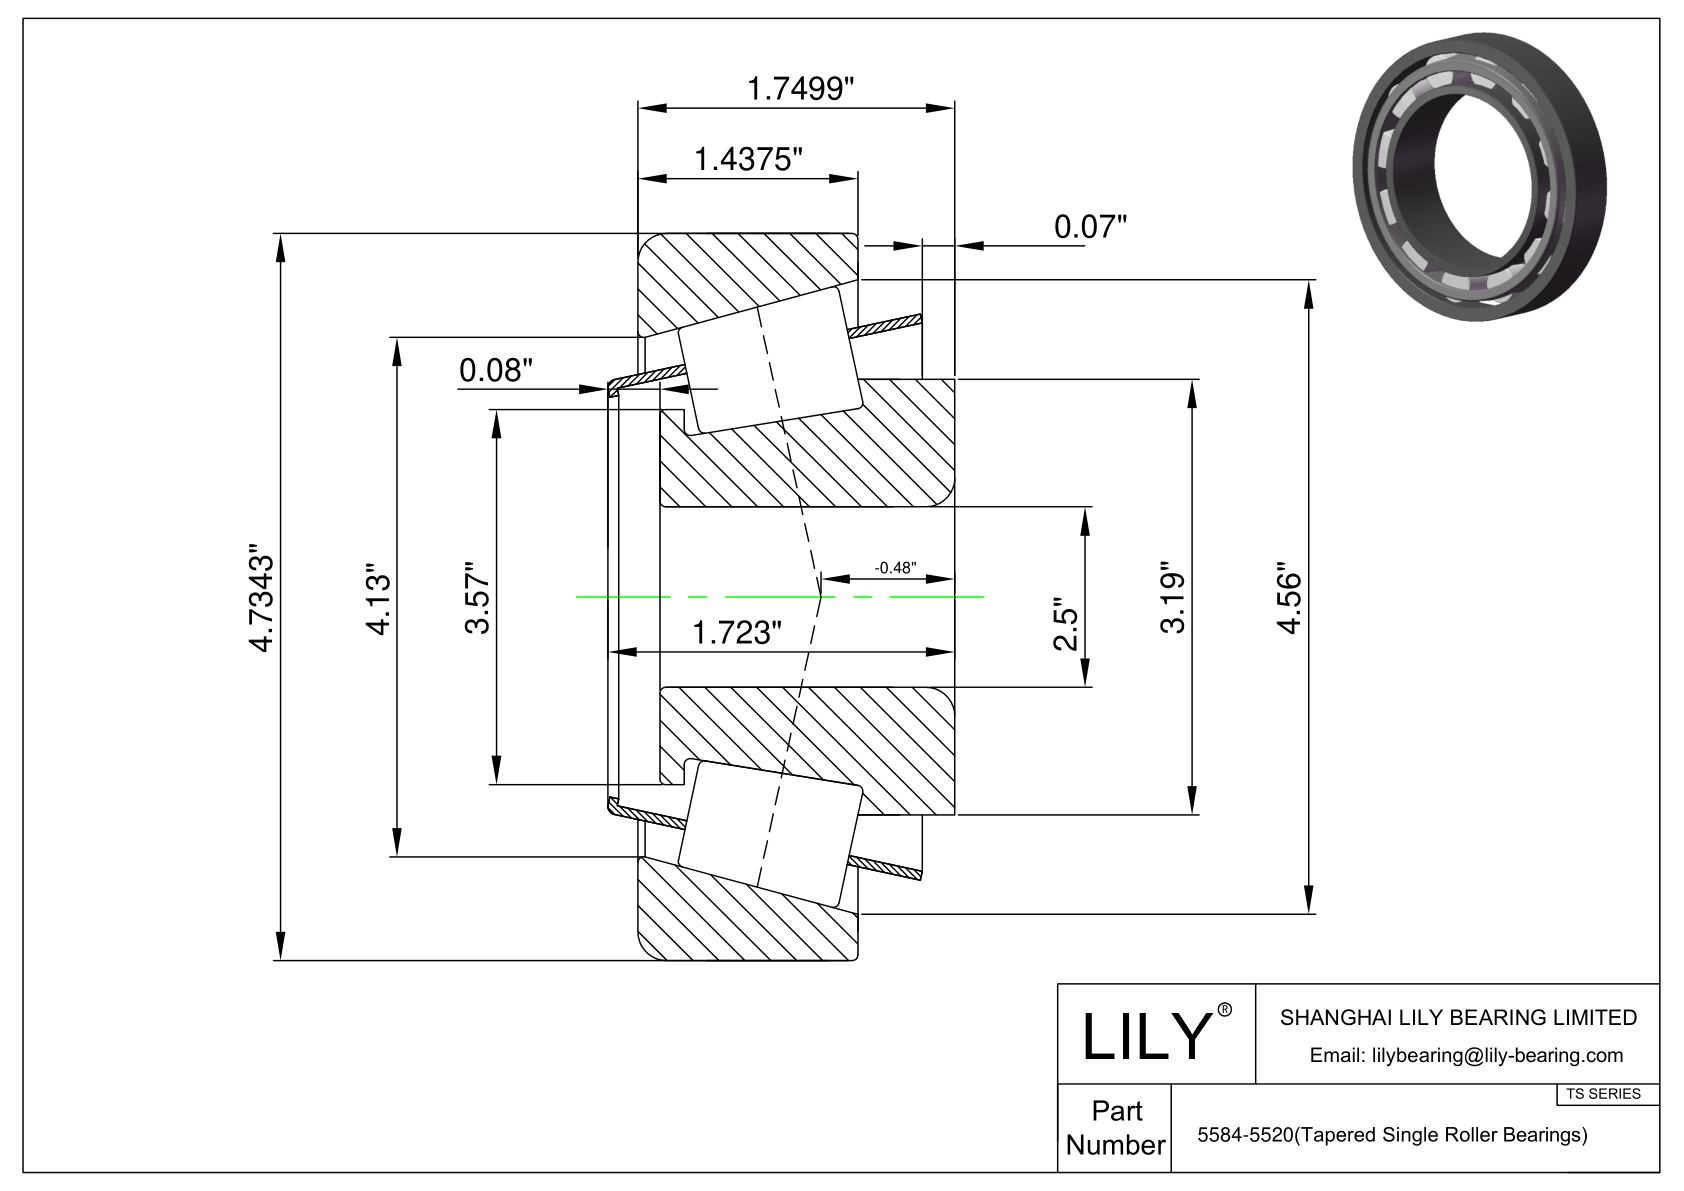 5584-5520 TS (Tapered Single Roller Bearings) (Imperial) cad drawing